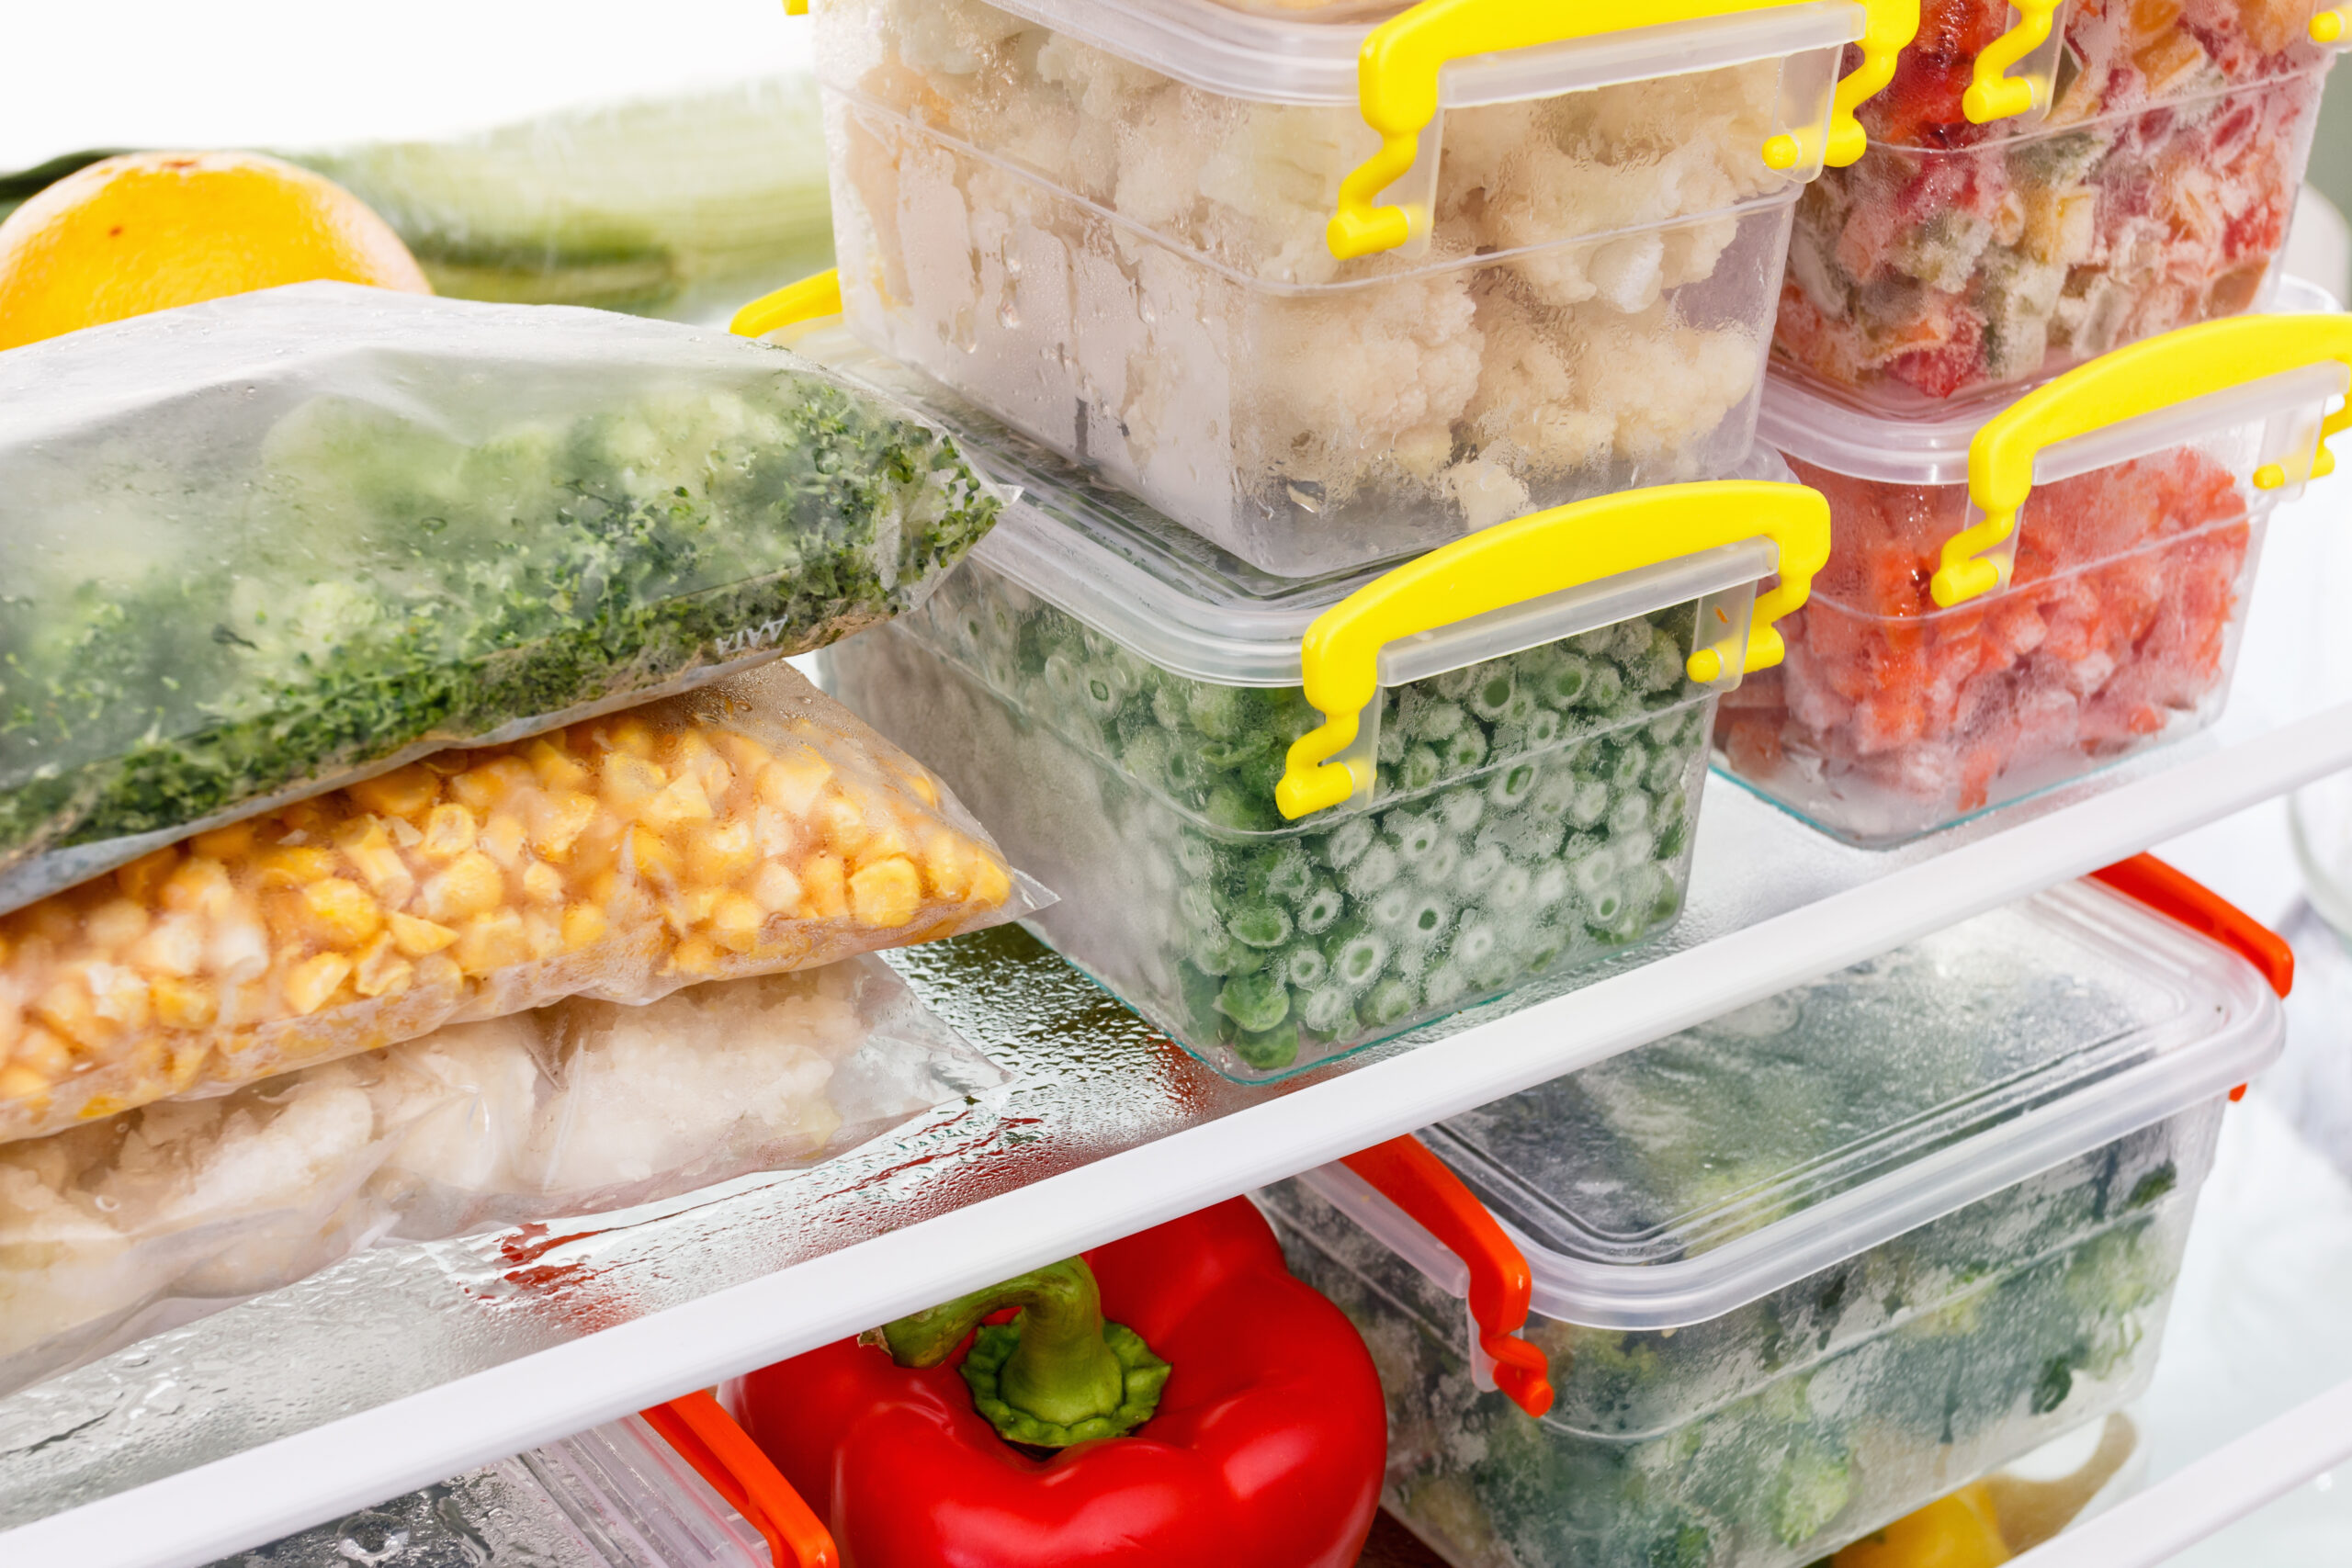 closeup of food in a fridge stacked in containers - feature image for RV fridge storage ideas